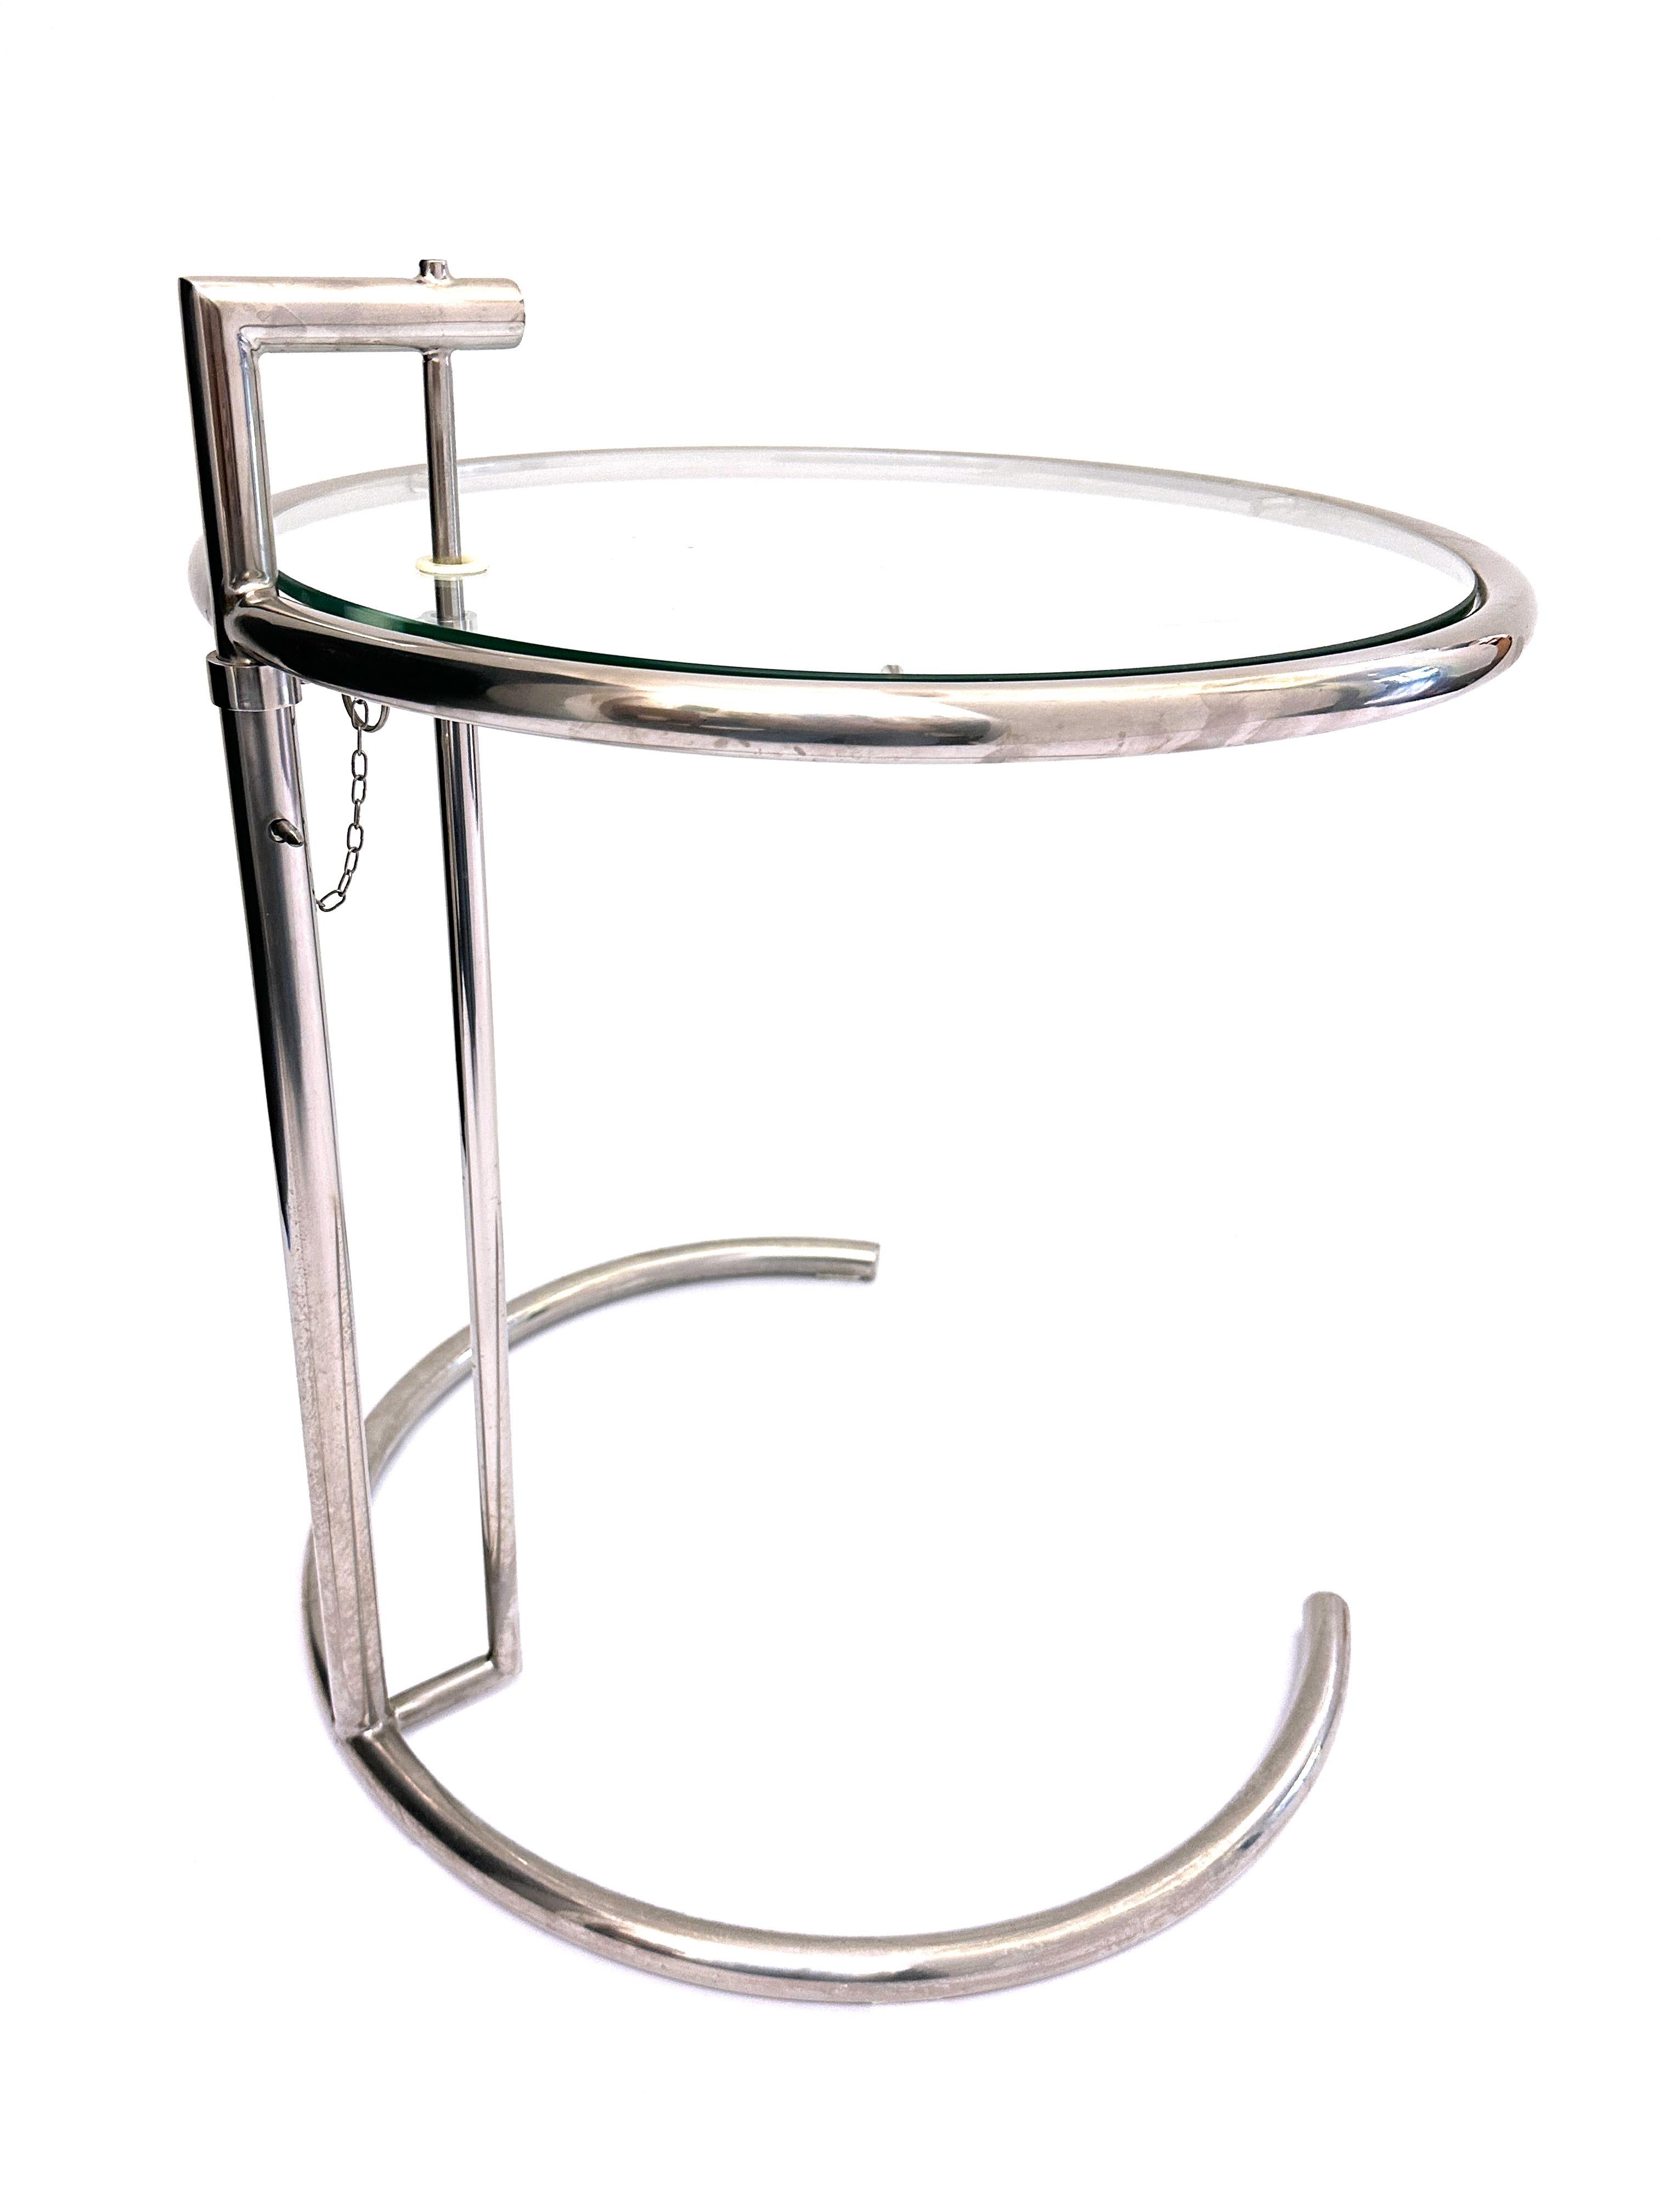 20th Century Chrome and Glas Side Table Attribited to the E-1027 Designed by Eileen Gray  For Sale